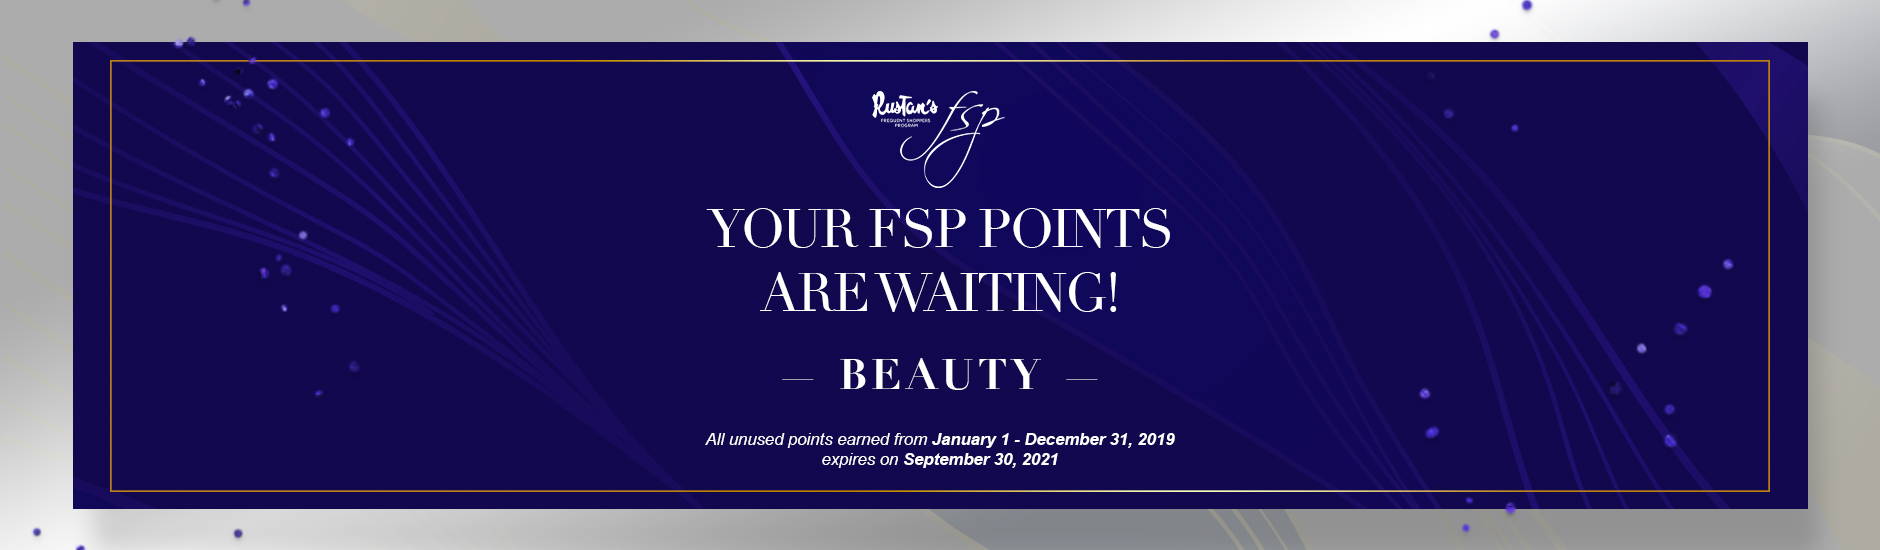 Your FSP Points are Waiting this September: Beauty